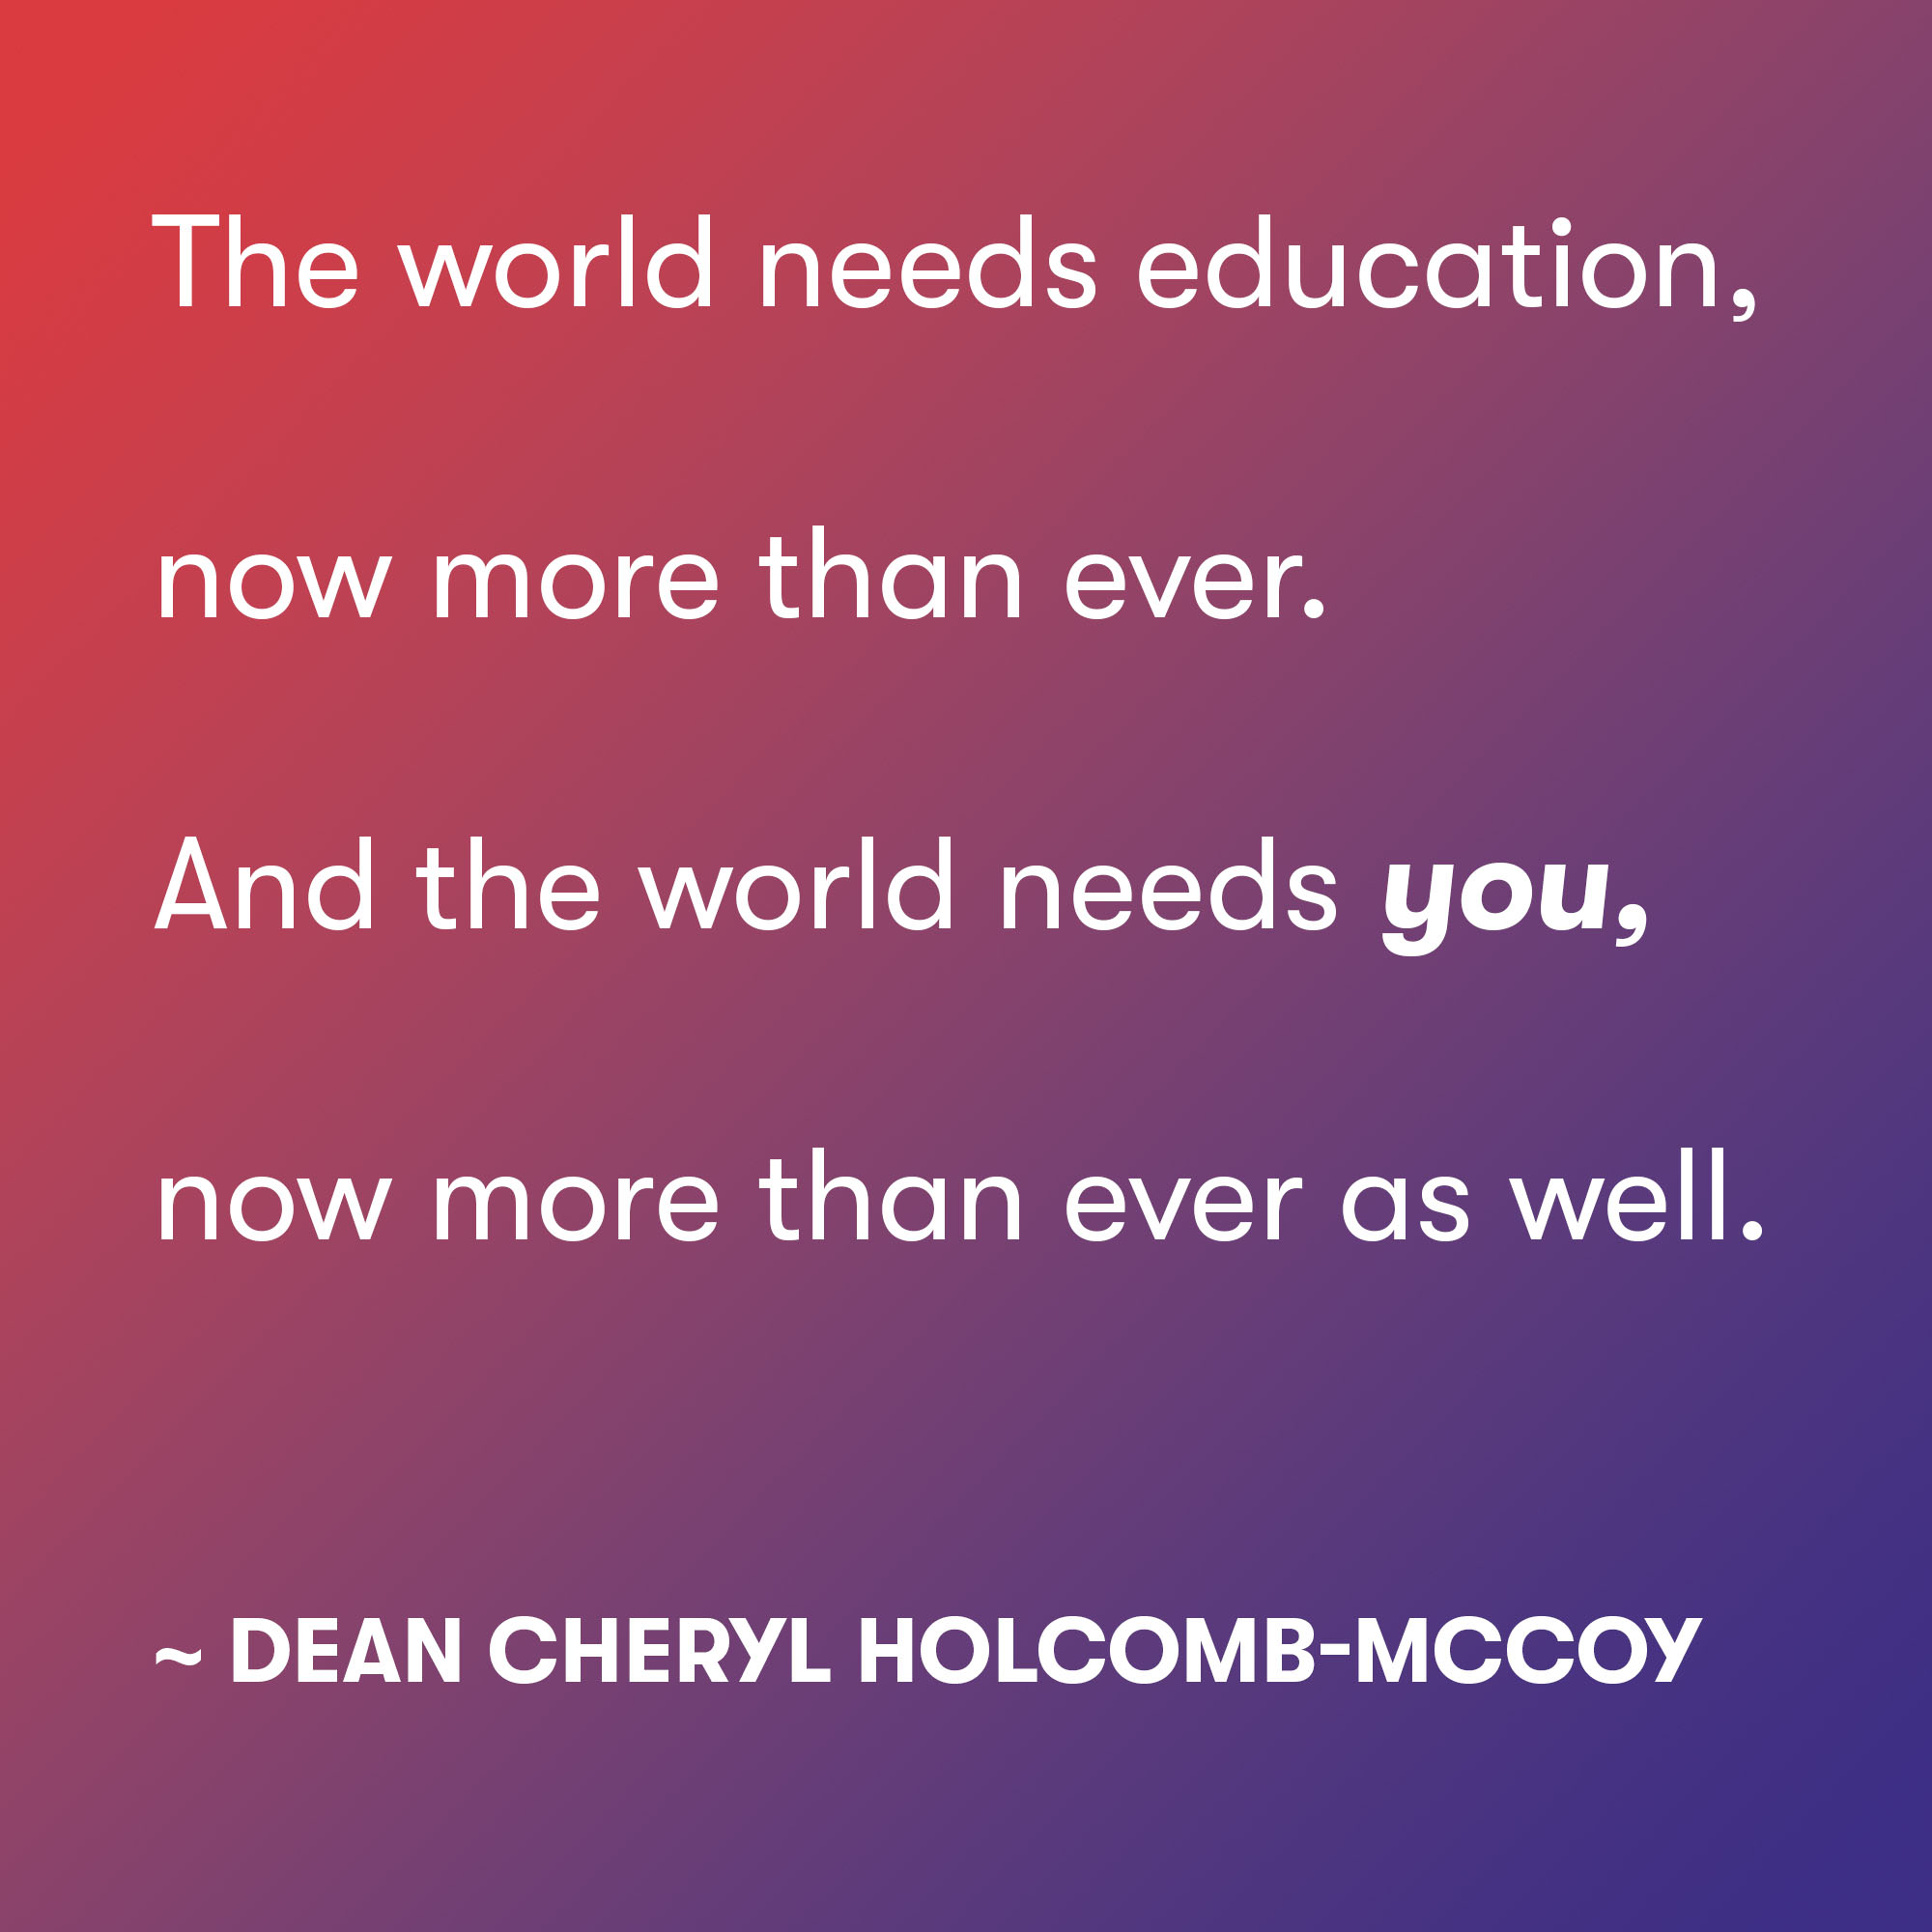 The world needs education, now more than ever. And the world needs you,now more than ever as well. ~ Dean Cheryl Holcomb-McCoy